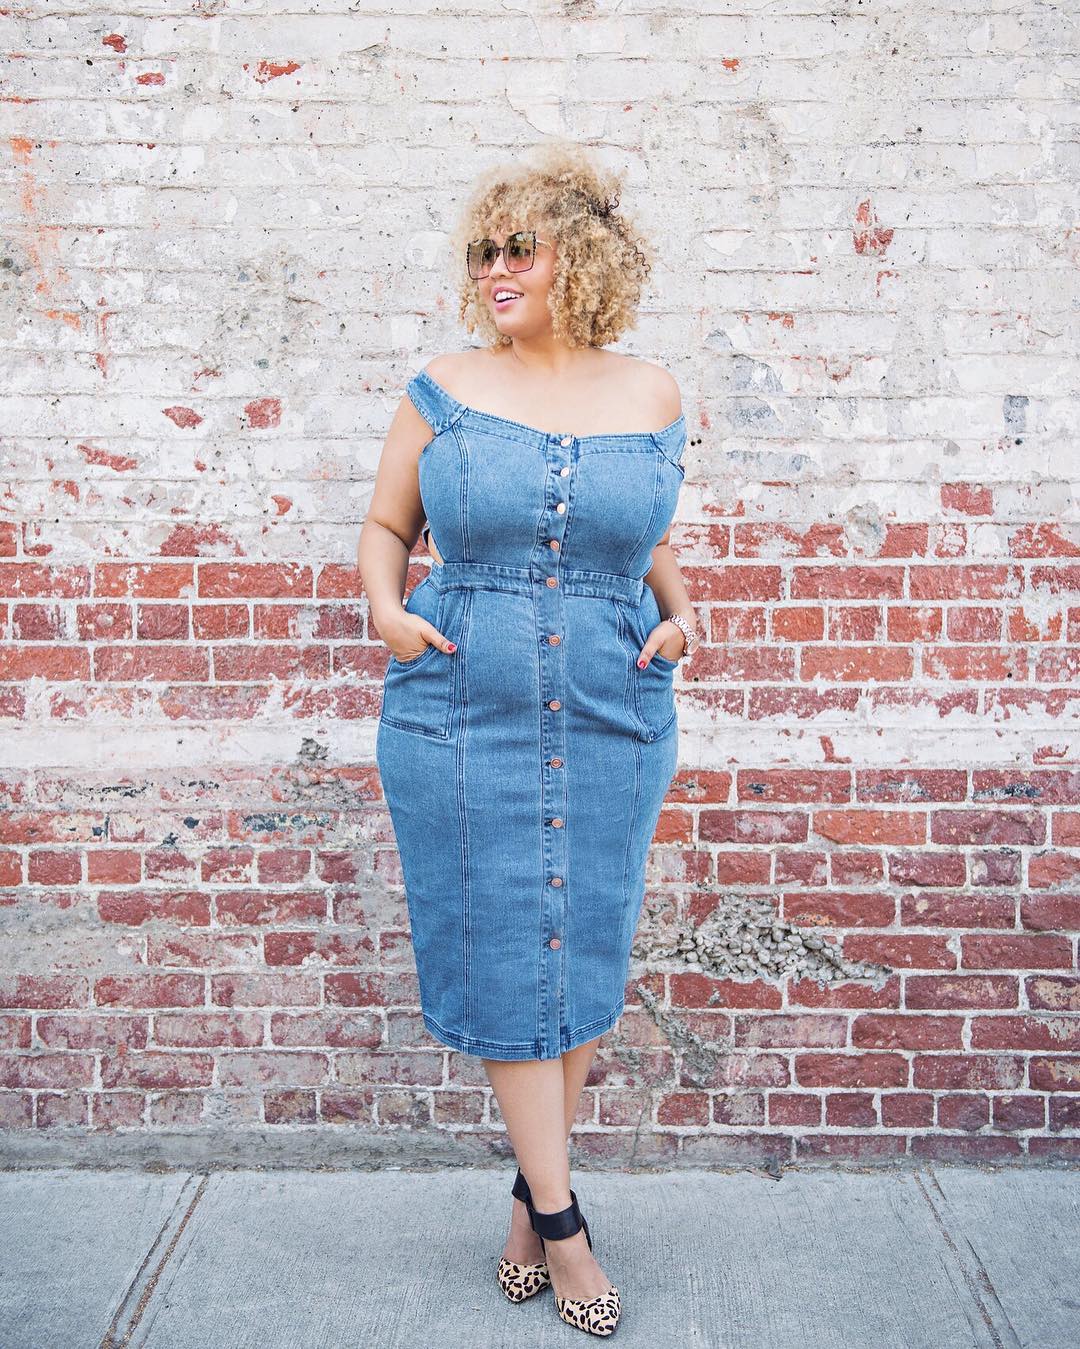 18 Best Plus Size Celebrities Outfit Ideas from This Year